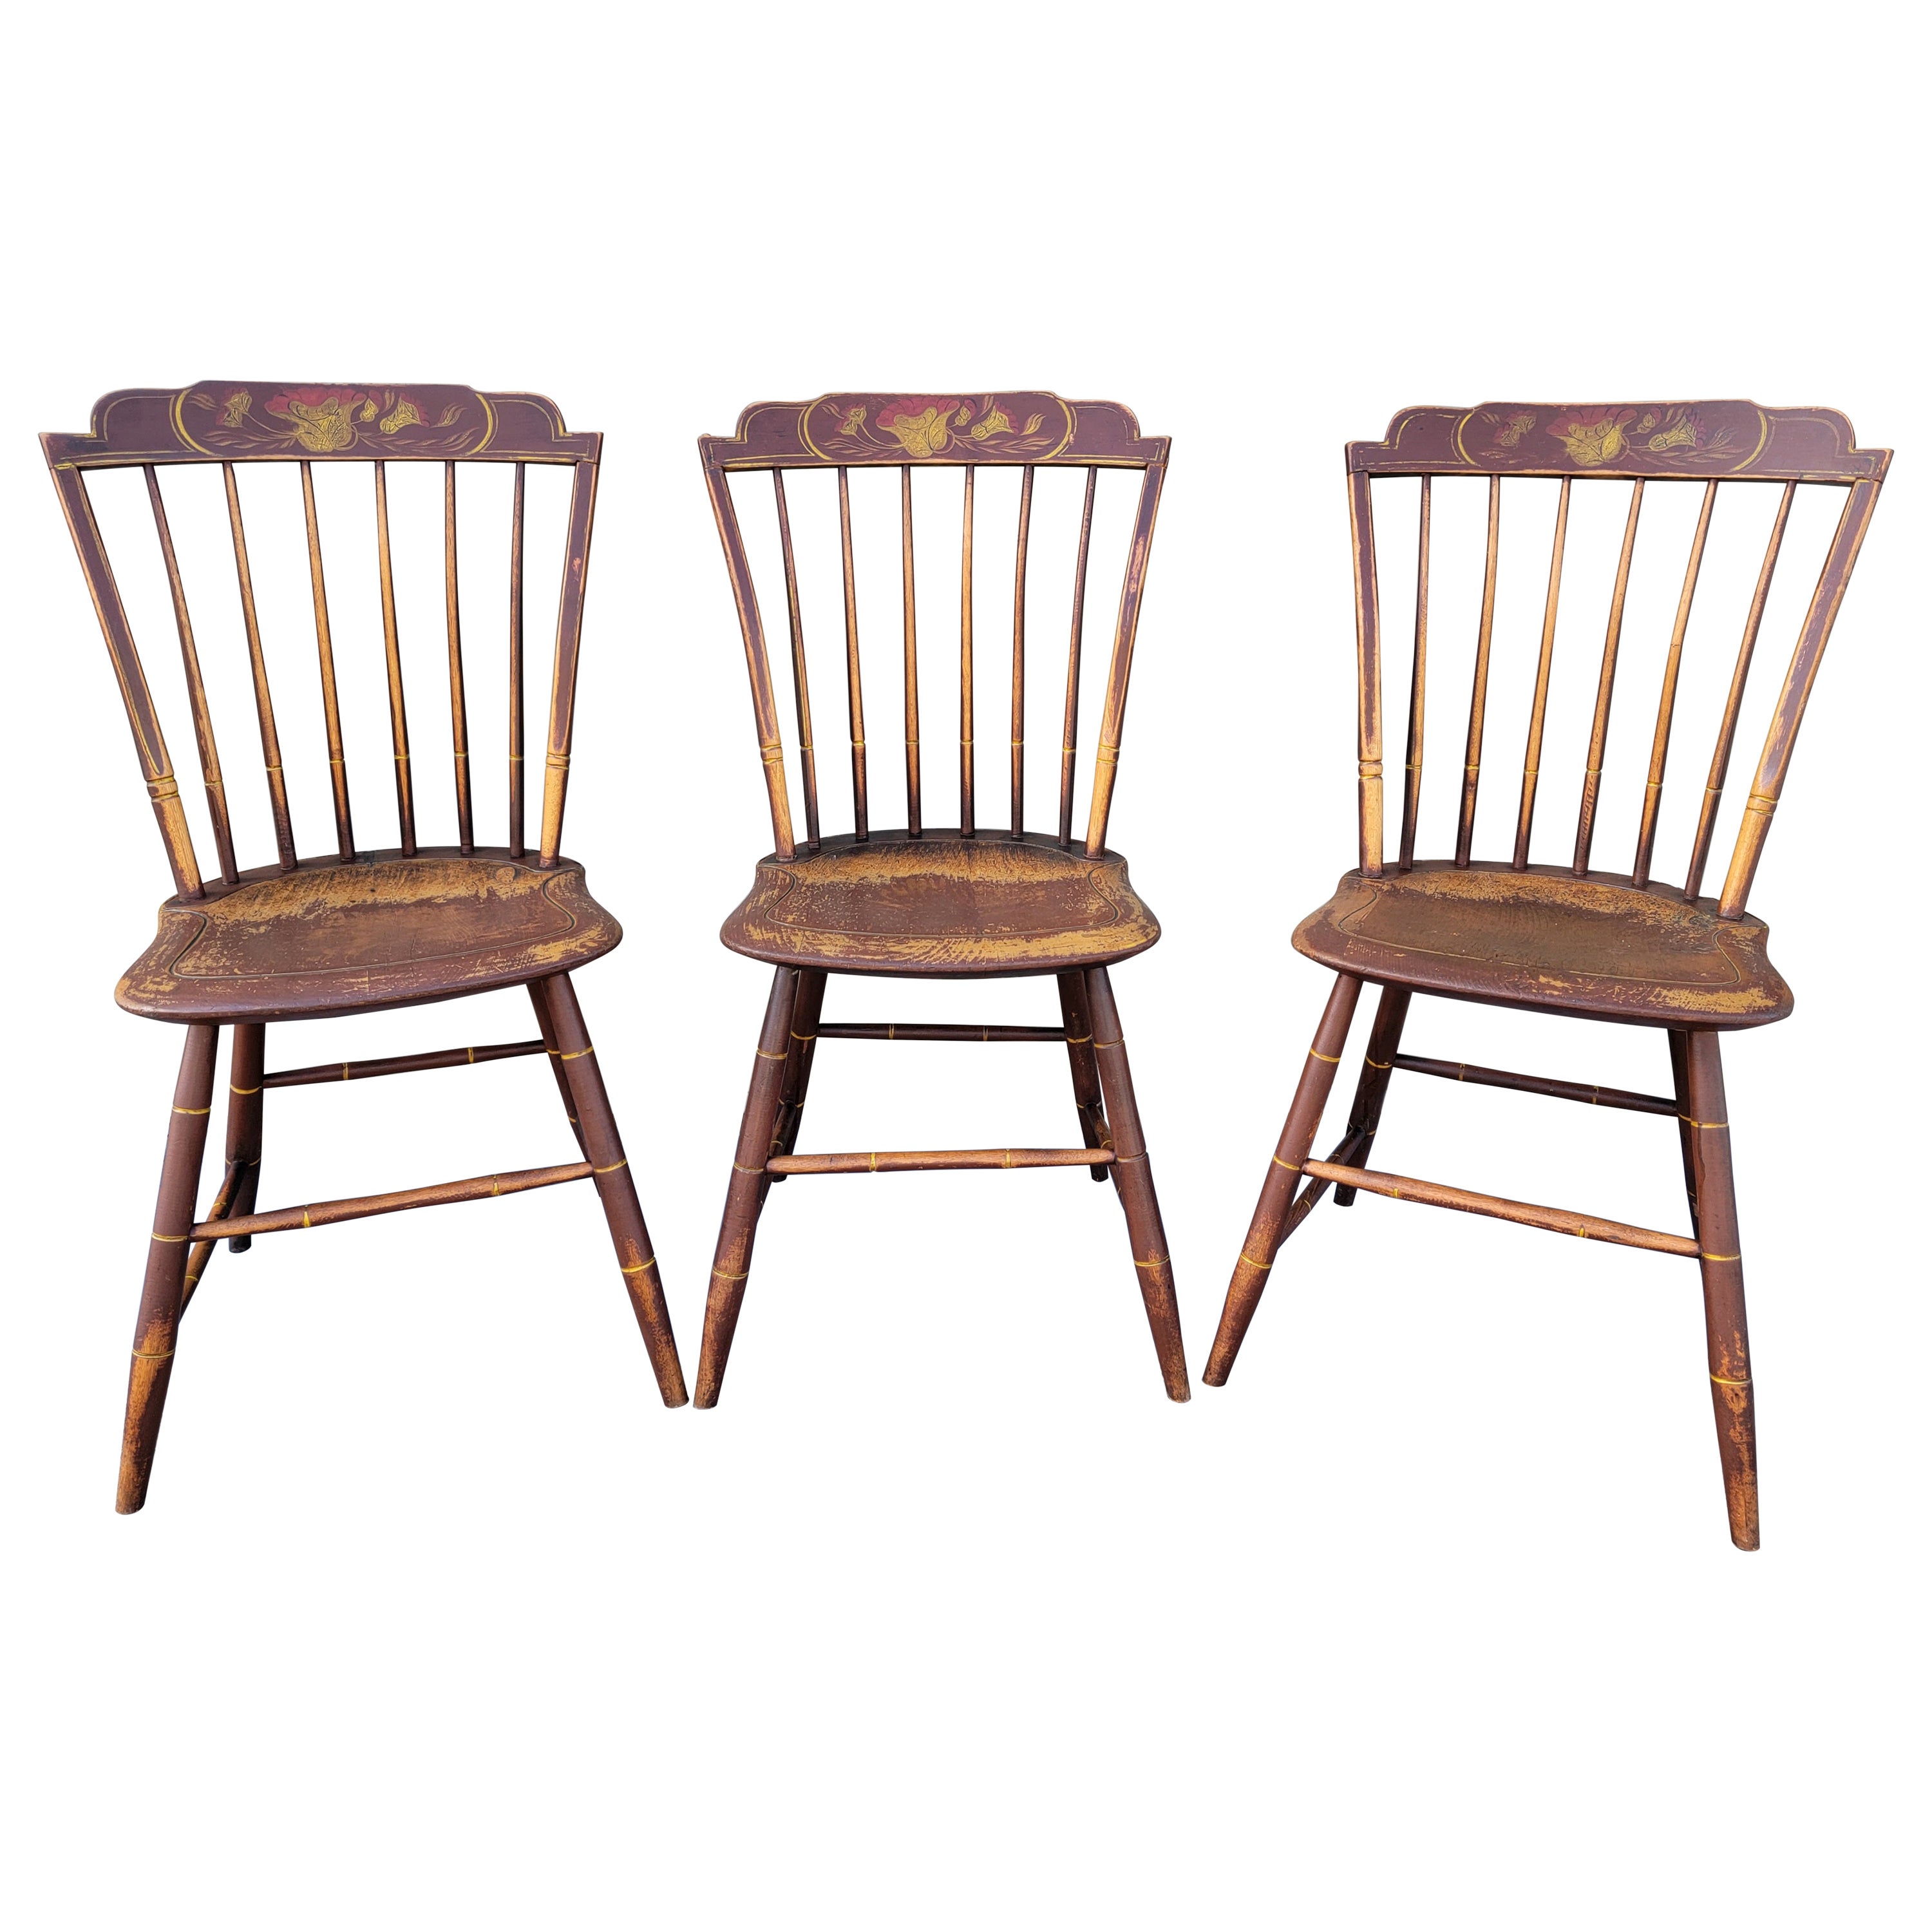 Early 19Thc Original Paint Decorated Windsor Chairs